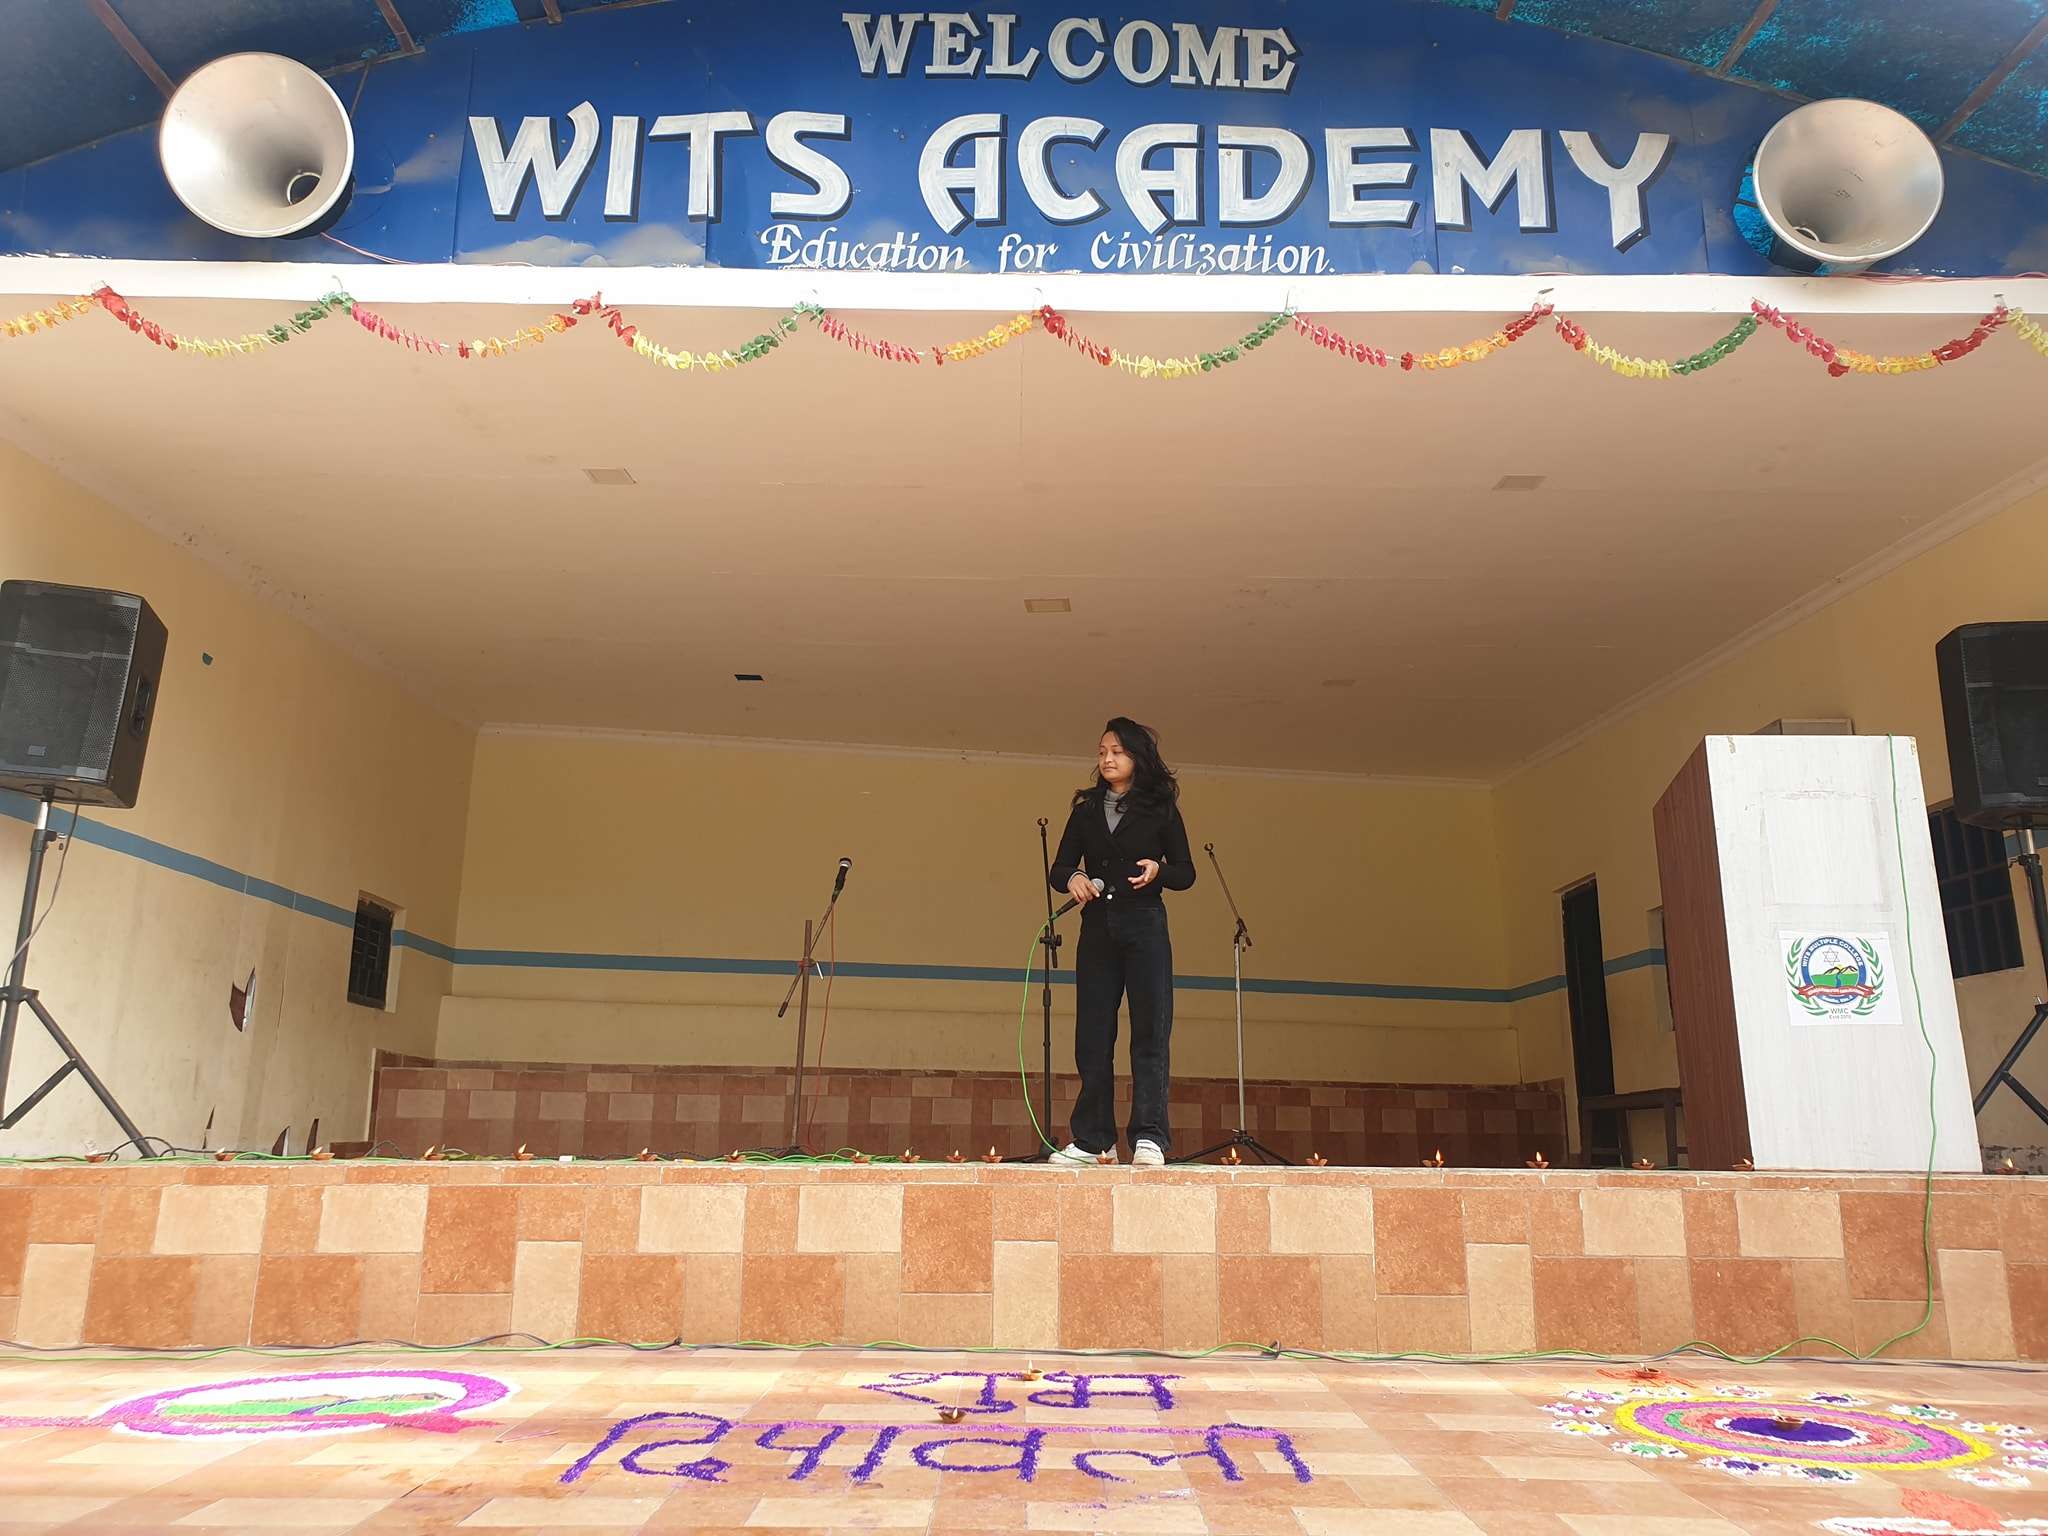 WITS ACADEMY